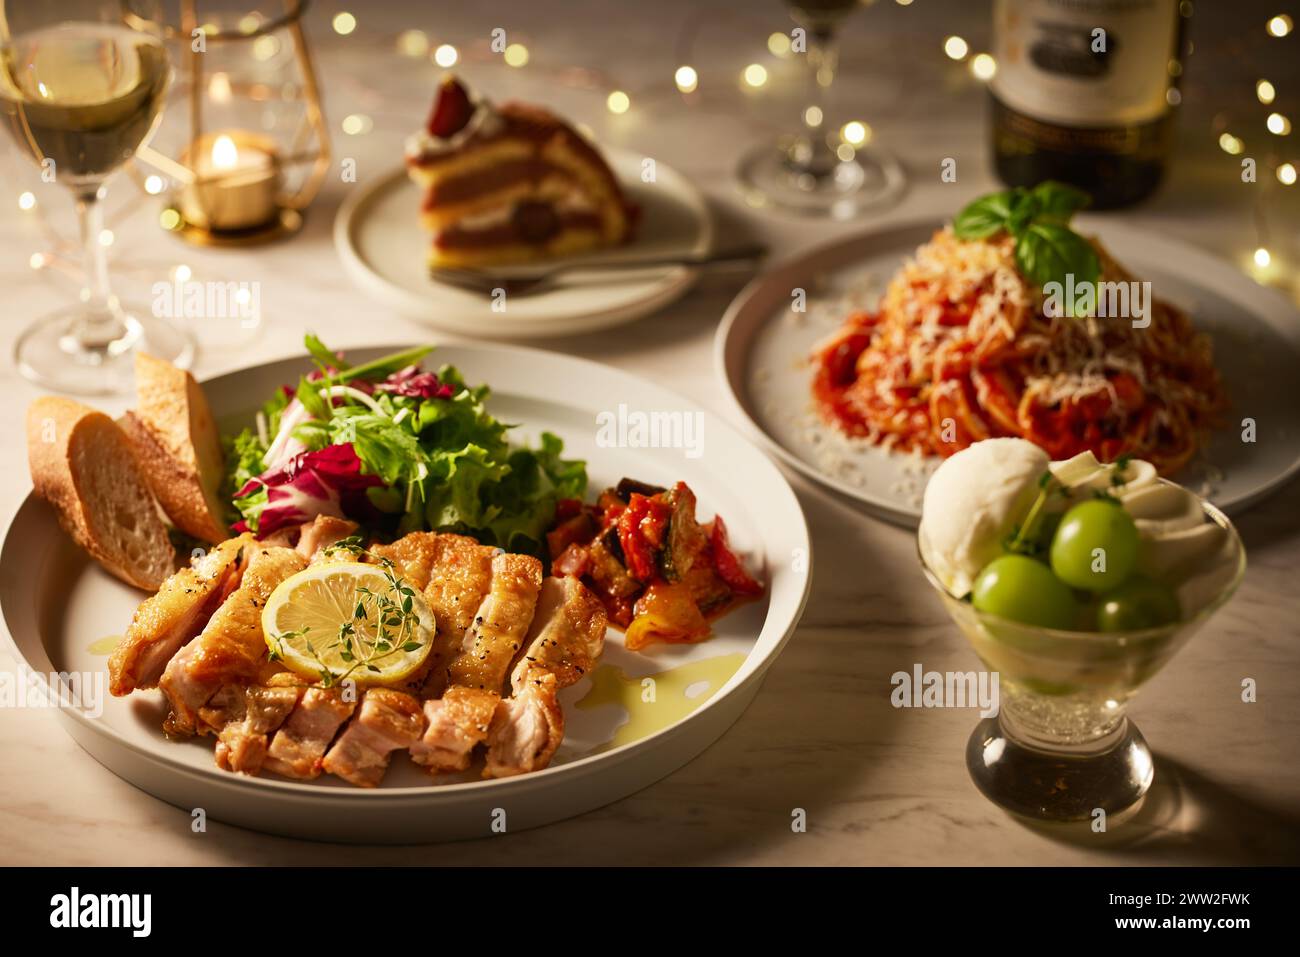 A table with food and wine Stock Photo